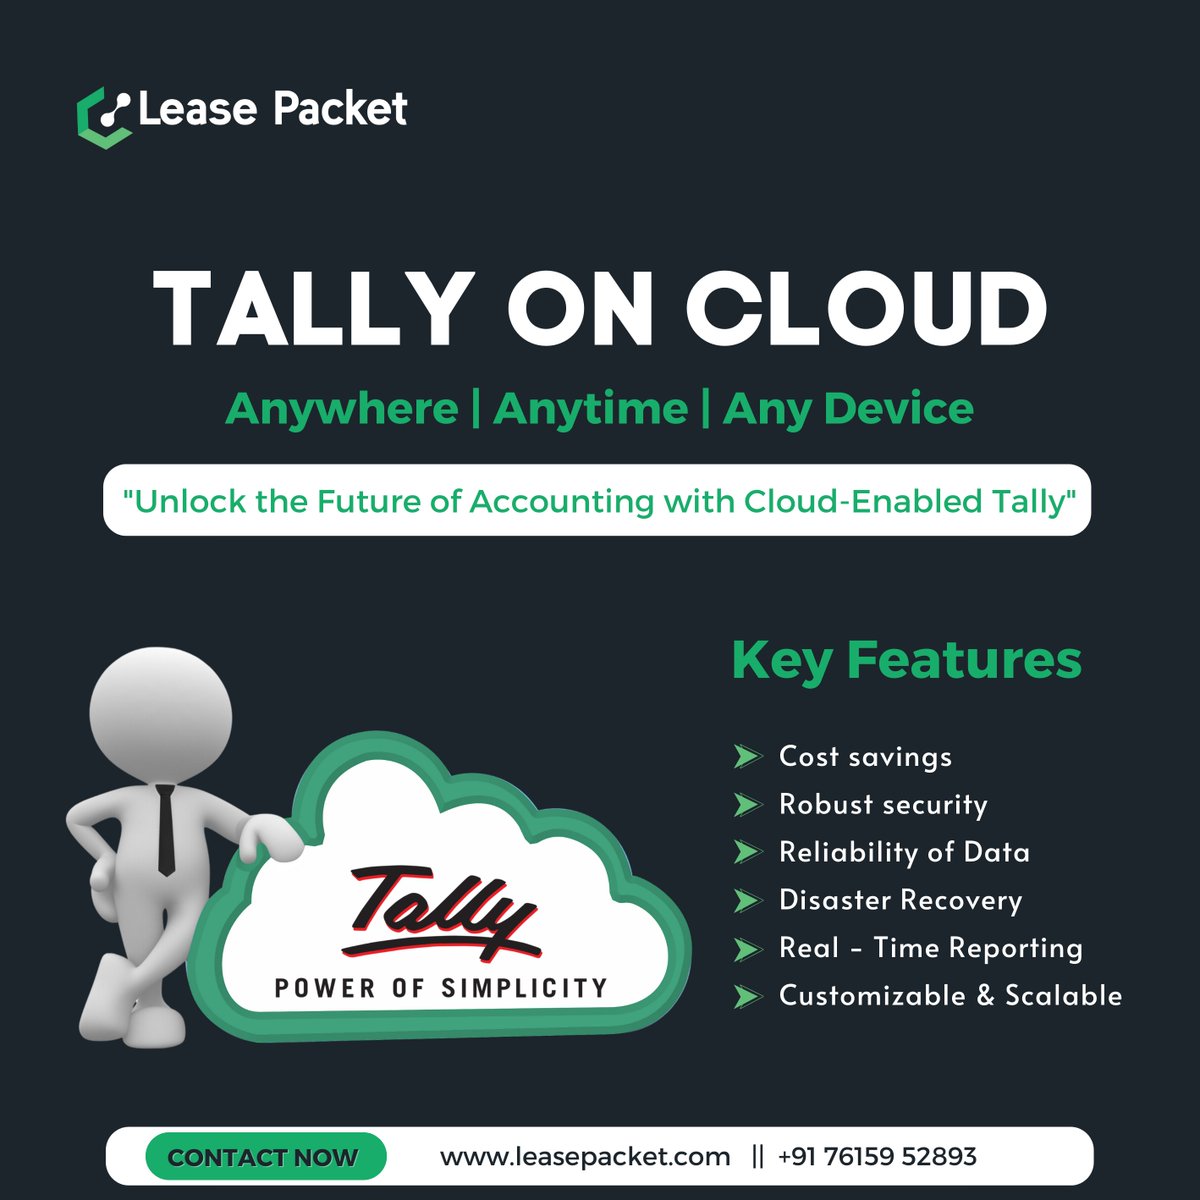 Keep your finances at your fingertips with Tally on Cloud solutions by Lease Packet—secure, accessible, and always updated.
#tally #tallyserver #tallycloud #tallylicense #tallylicenseprovider #cloud #webserver #tallysolutions #serverprovider #serversolutions #leasepacket